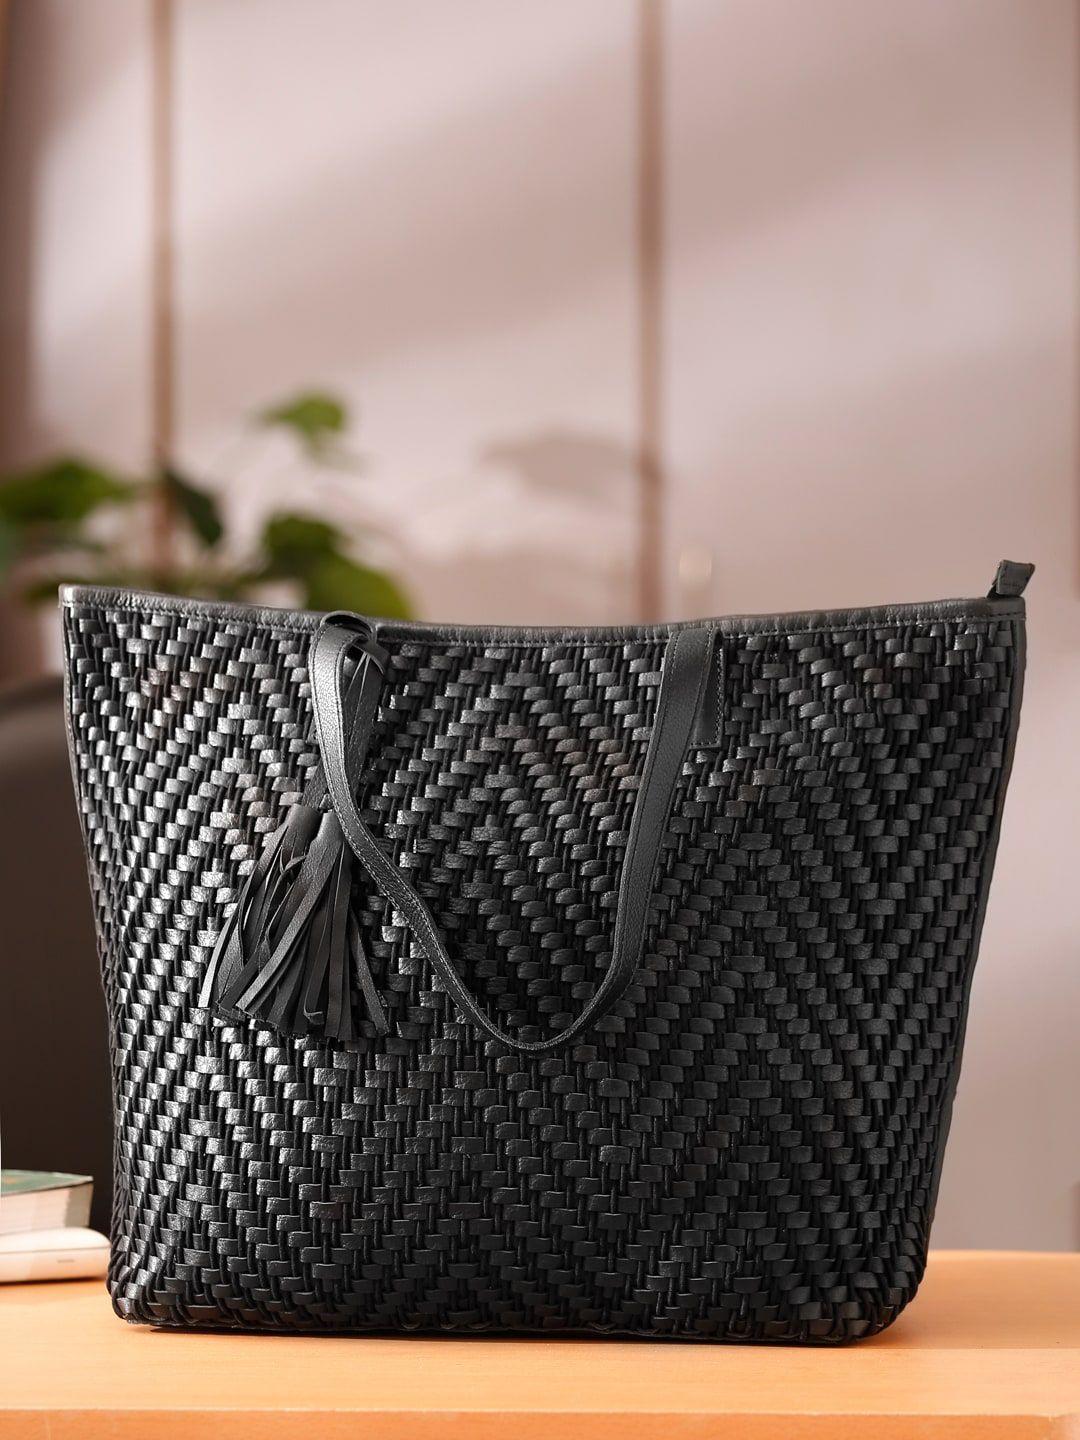 suvaska black textured leather oversized structured shoulder bag with quilted